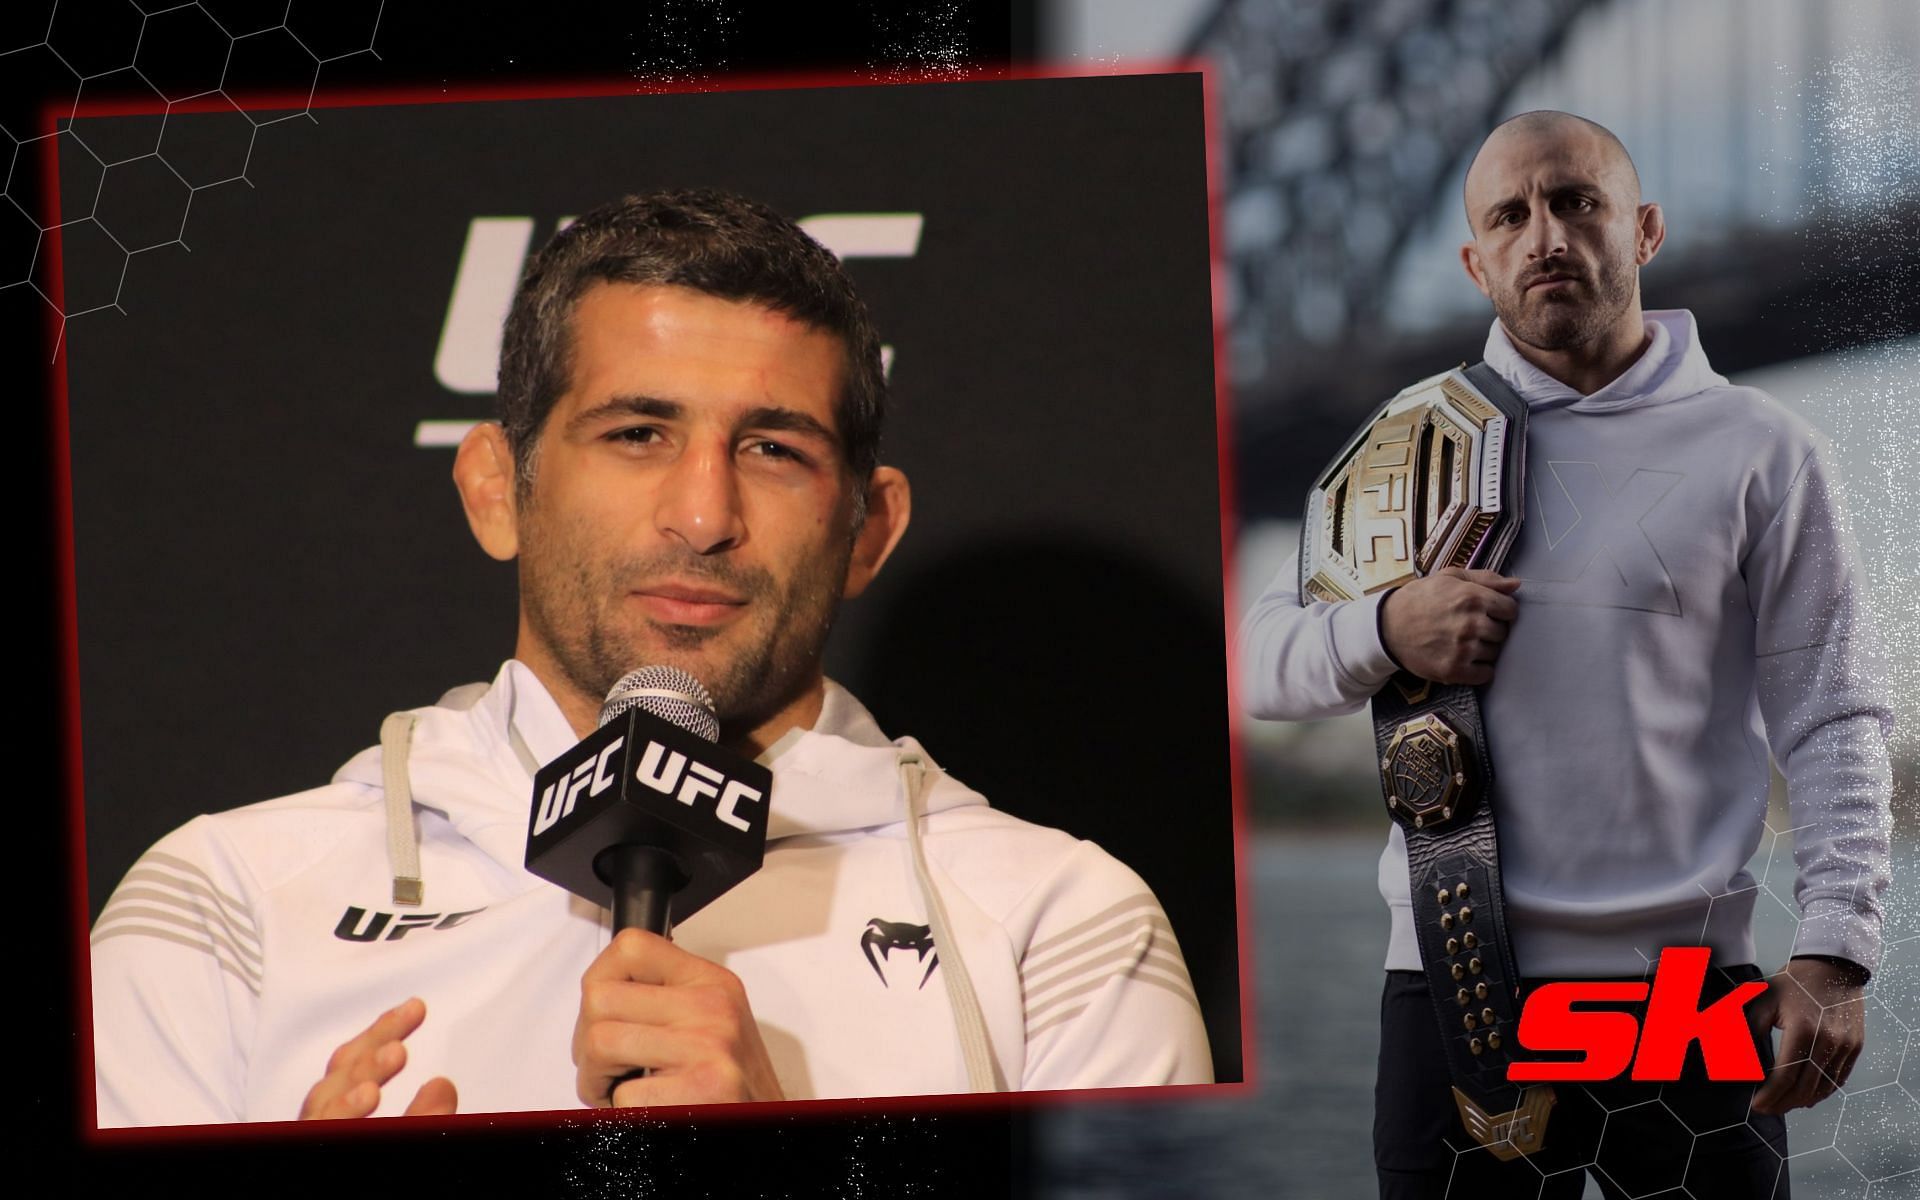 Beneil Dariush weighs in on Alexander Volkanovski potentially cutting ahead of him for lightweight title shot. [image credits: Getty. Images.]